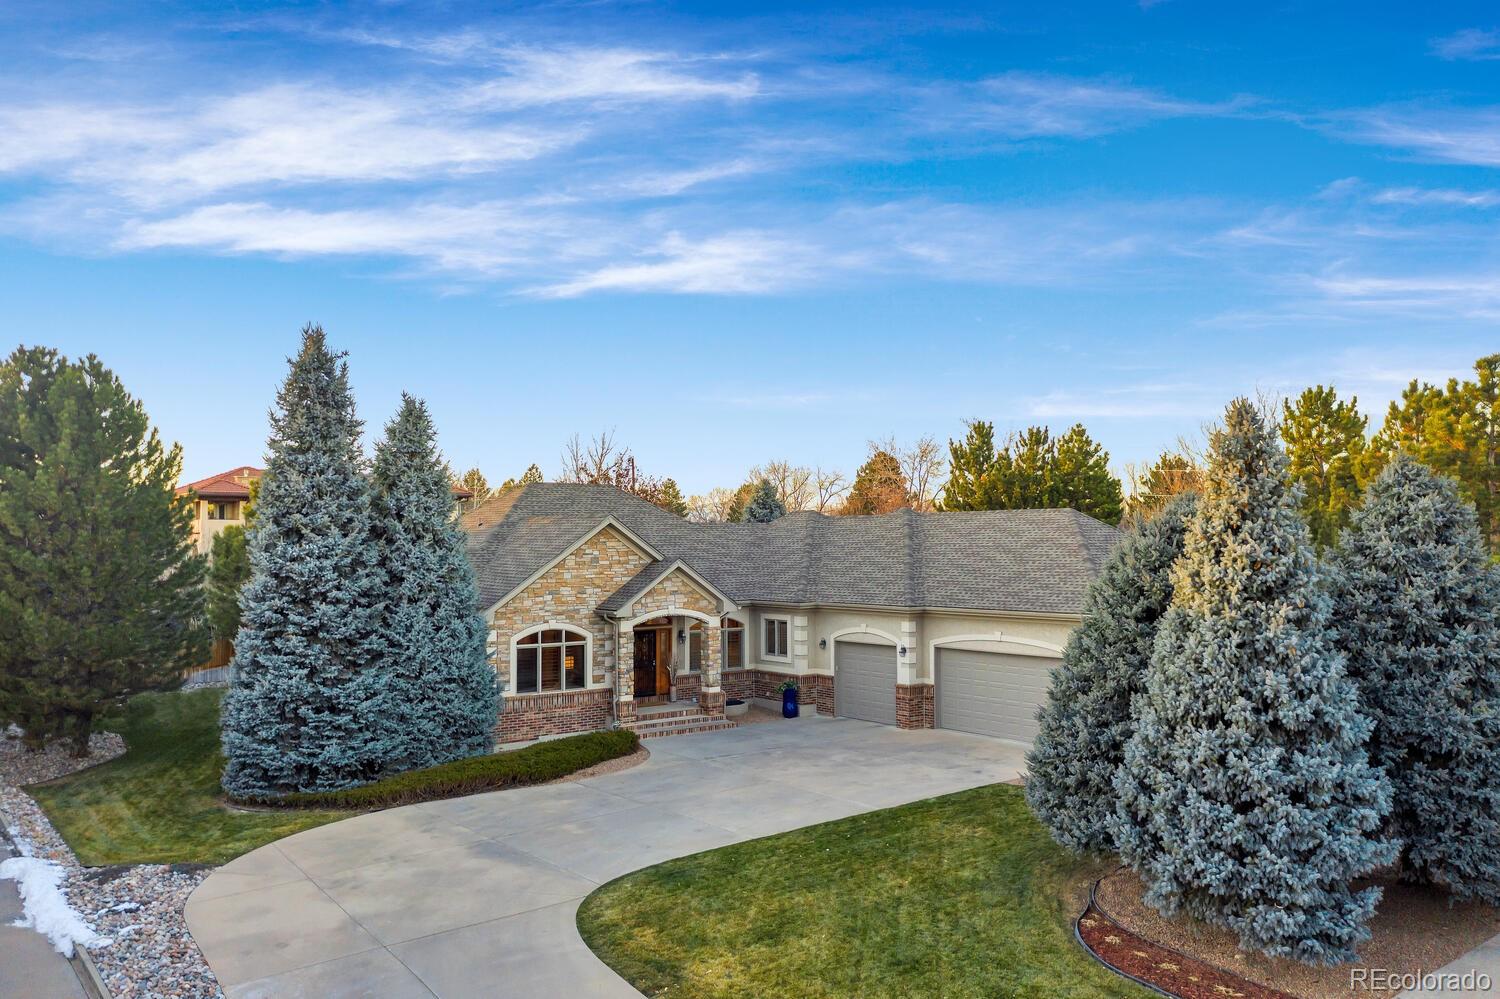 Stunning front exterior with mature trees